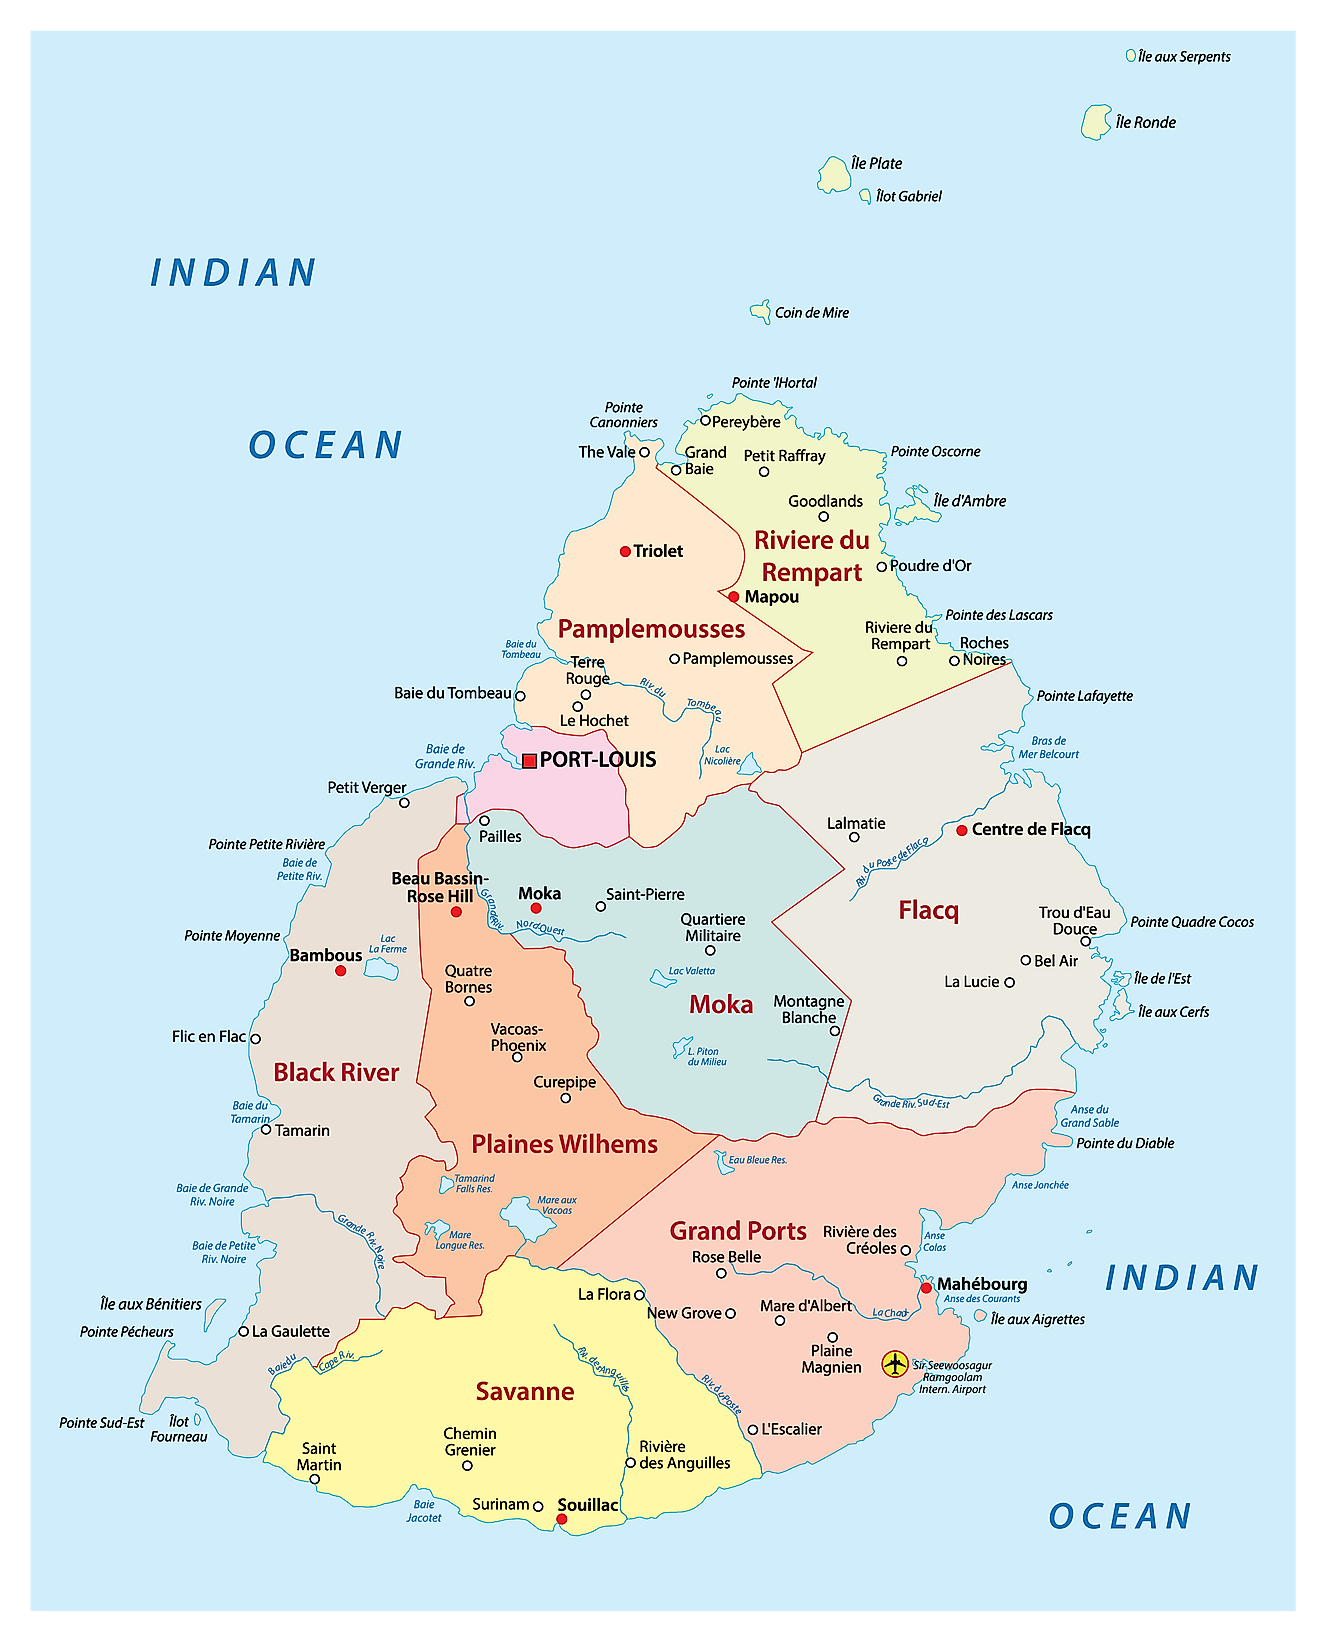 The Political Map of Mauritius showing the nine districts of the country, their capitals, and the national capital of Port Louis.